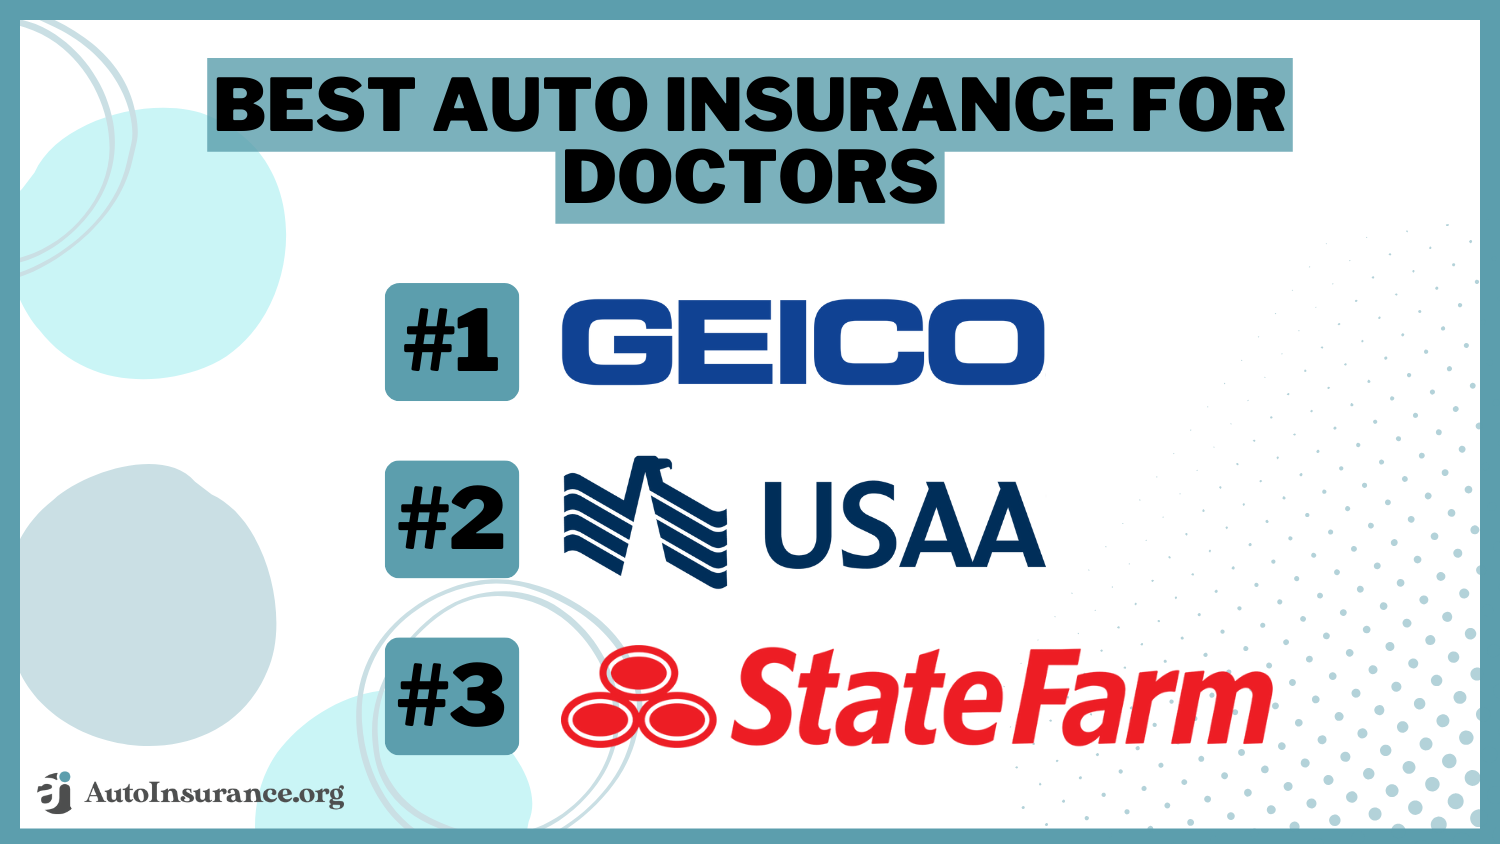 Best Auto Insurance for Doctors: Geico, USAA, and State Farm